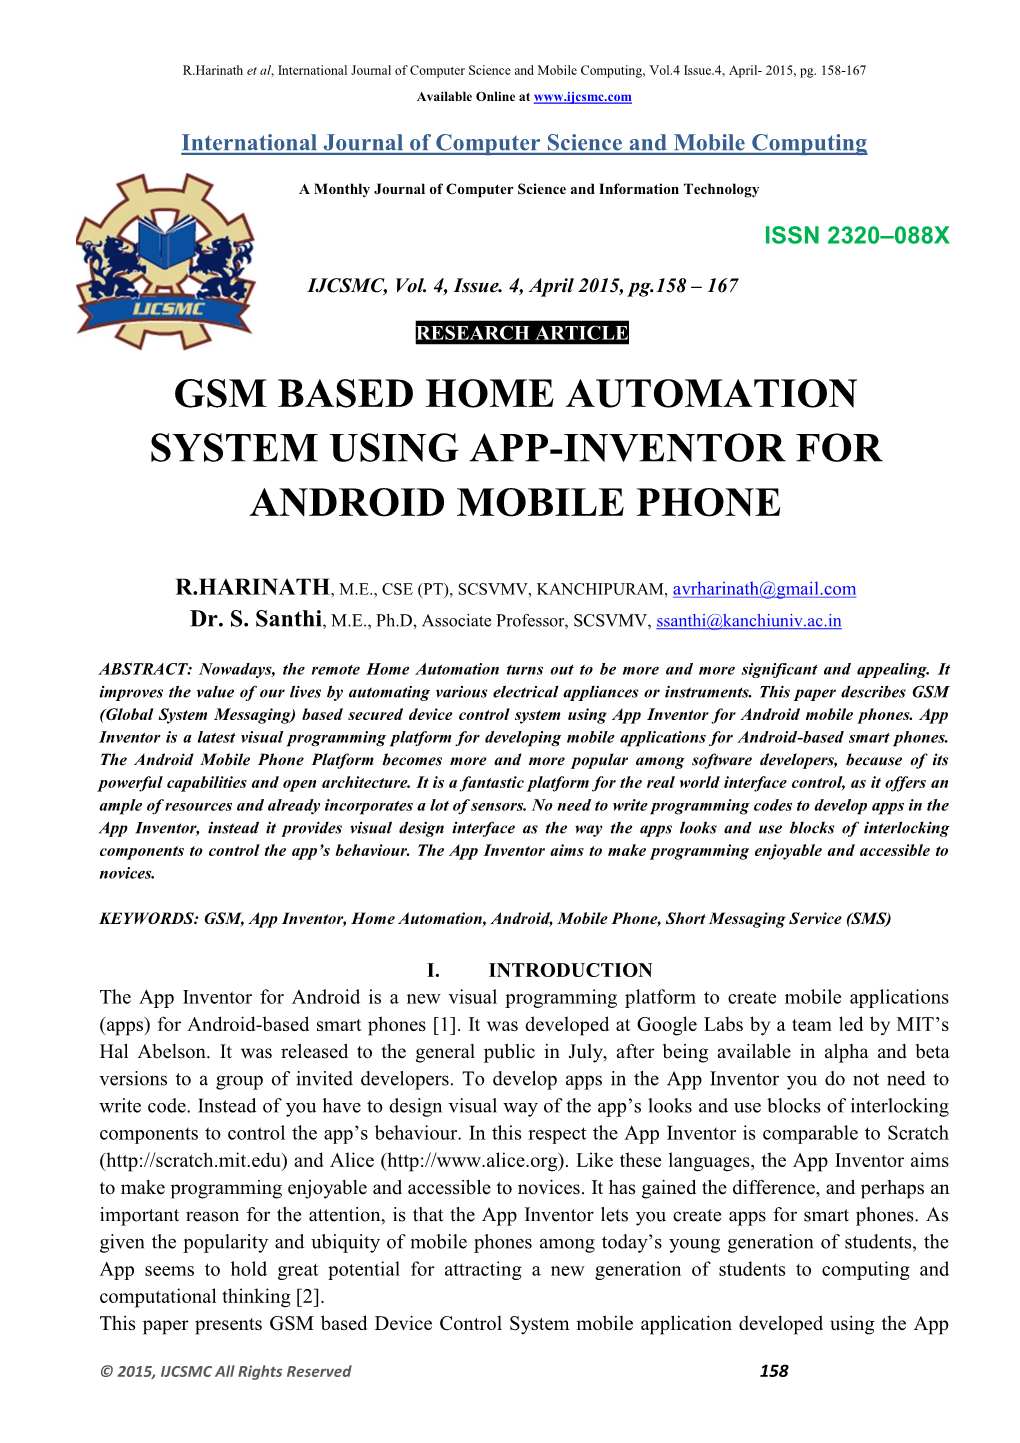 Gsm Based Home Automation System Using App-Inventor for Android Mobile Phone